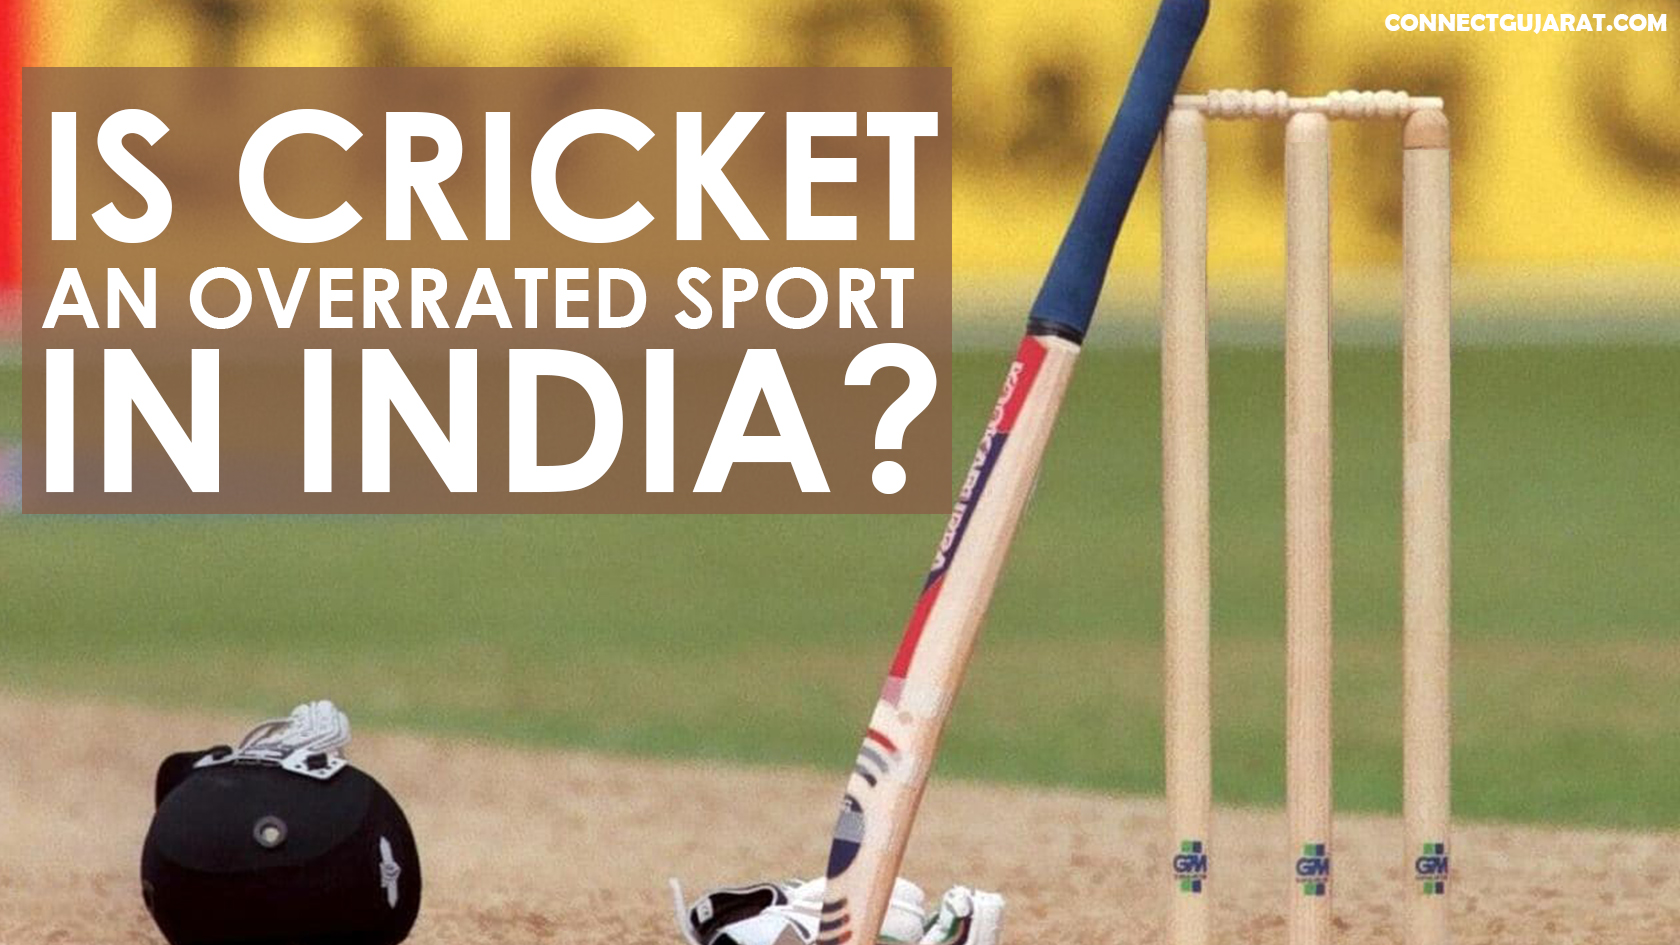 Is Cricket an overrated sport in India?